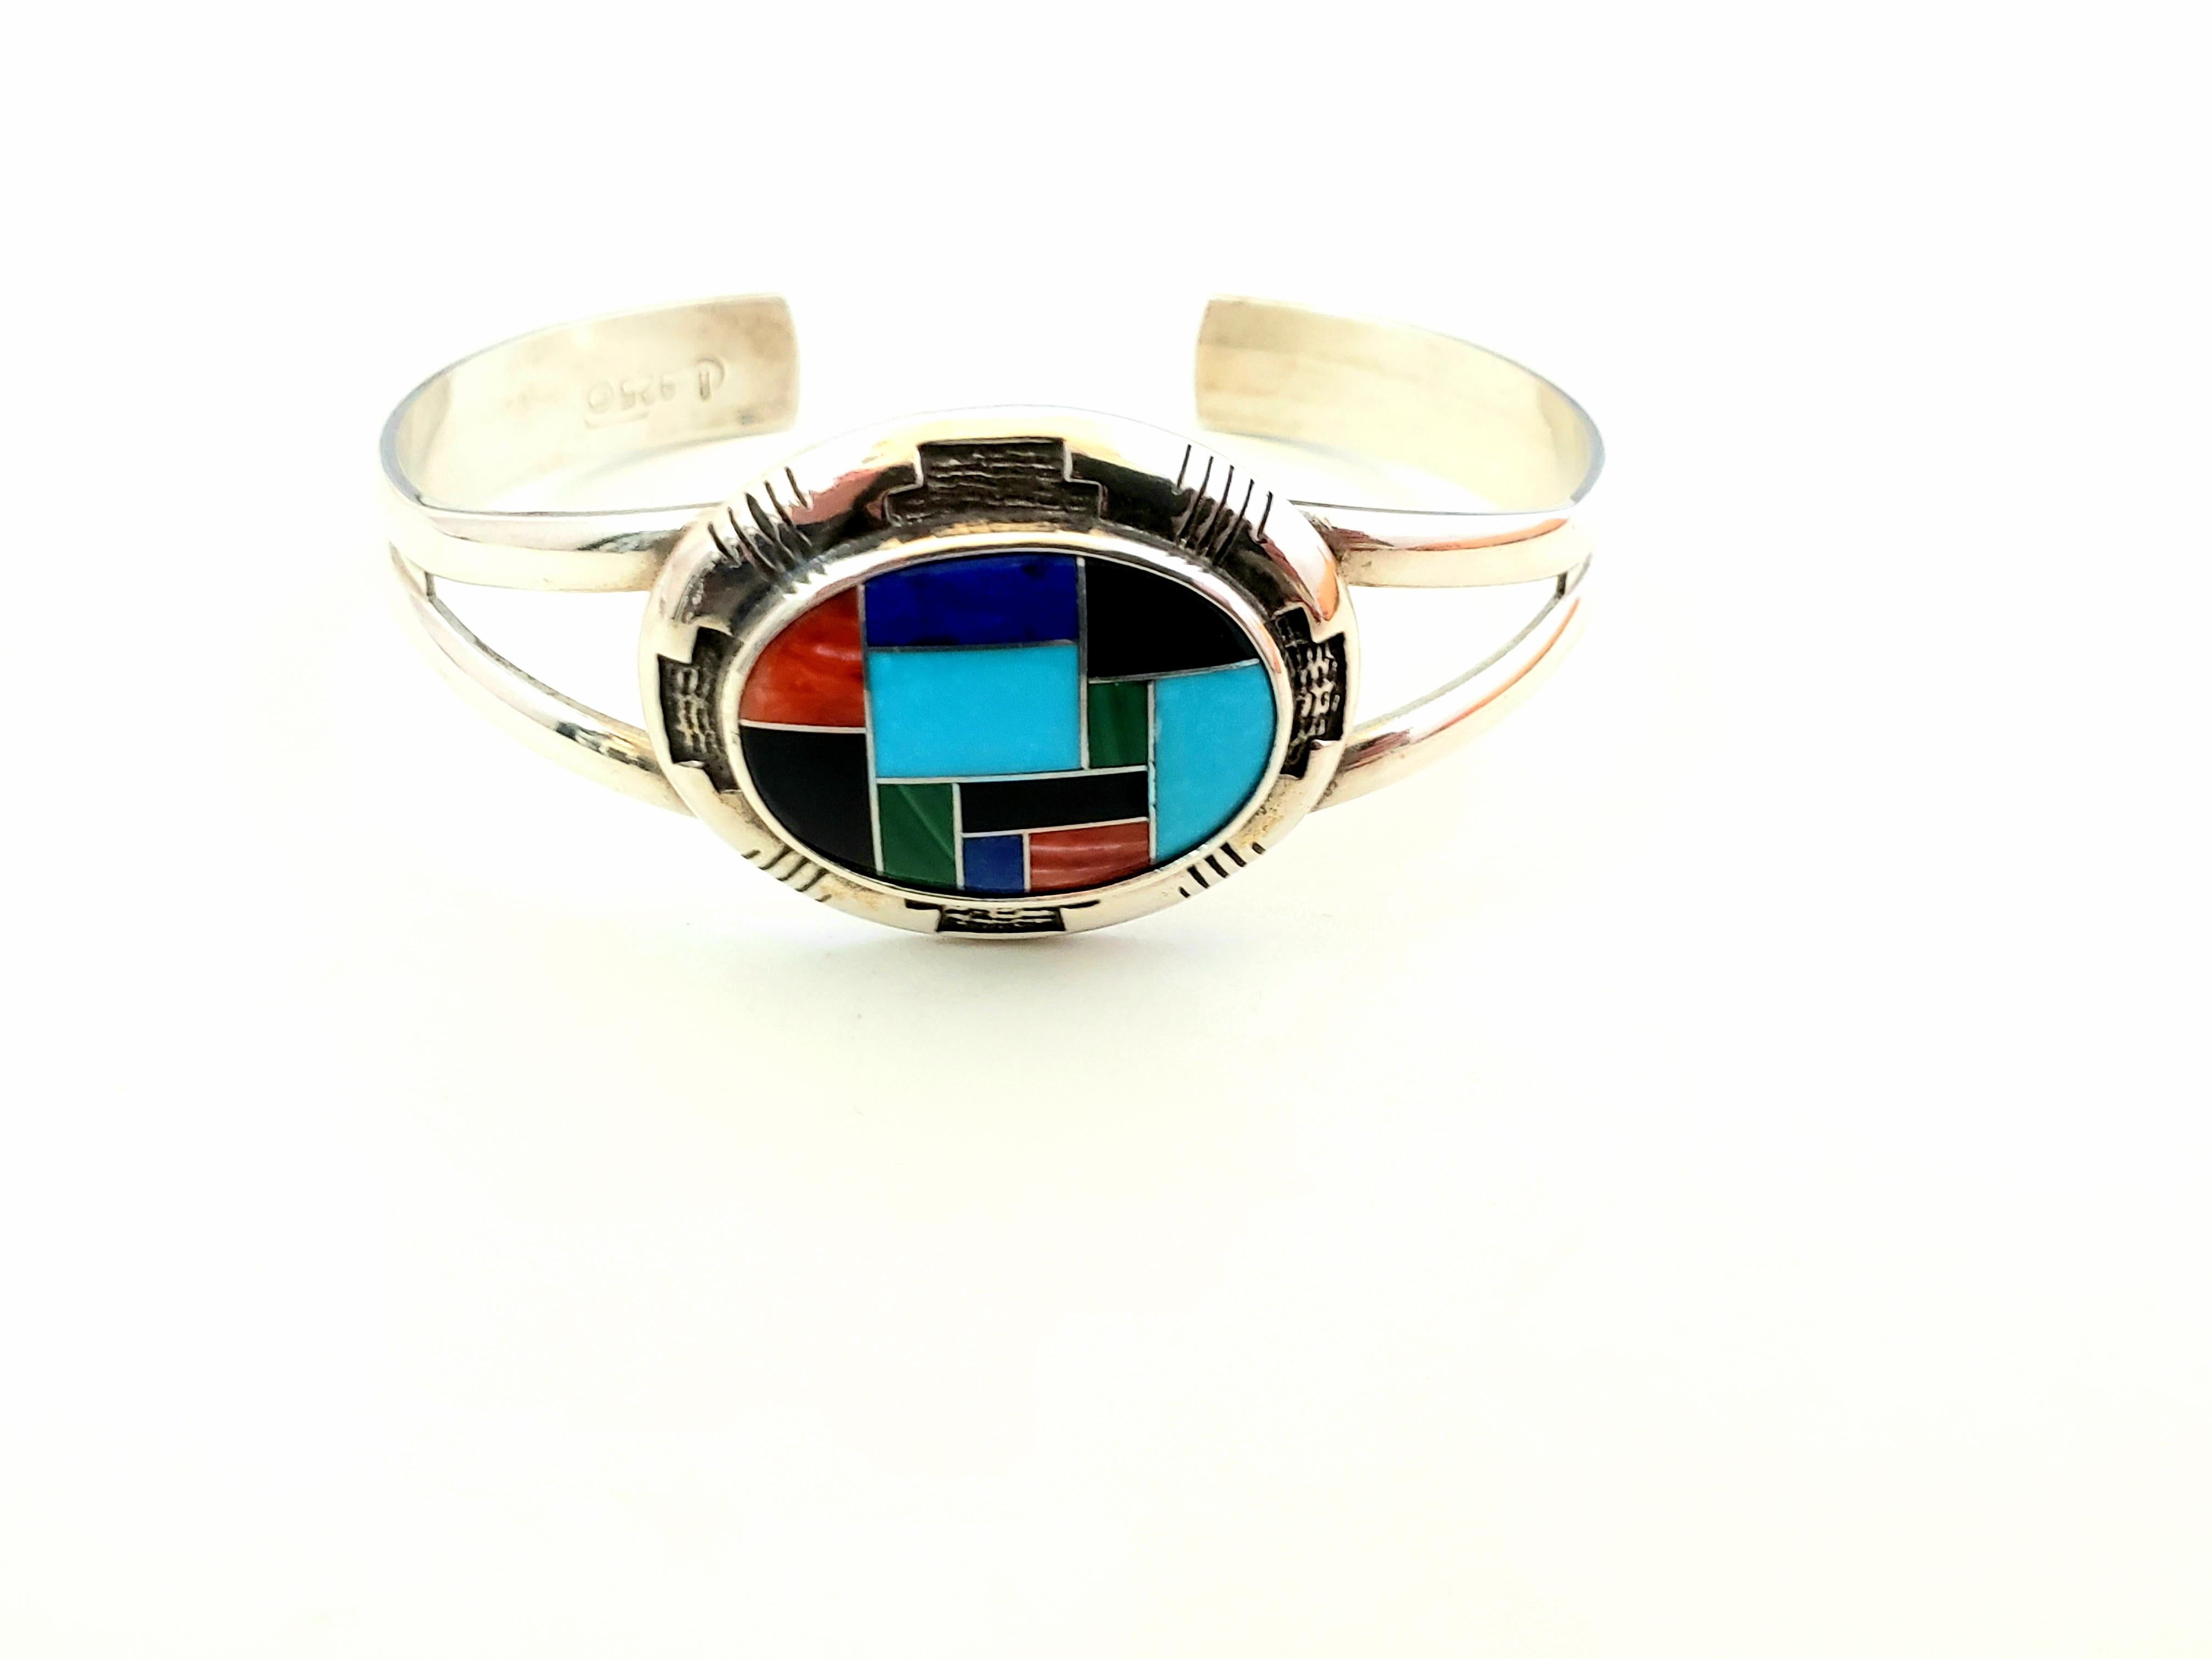 Carolyn Pollack Relios Sterling Silver MultiStone Inlay Cuff Bracelet

Carolyn Pollack Relios sterling silver cuff bracelet with inlay consisting of lapis, turquoise, black onyx, malachite, and orange spiny oyster. All stones are separated by